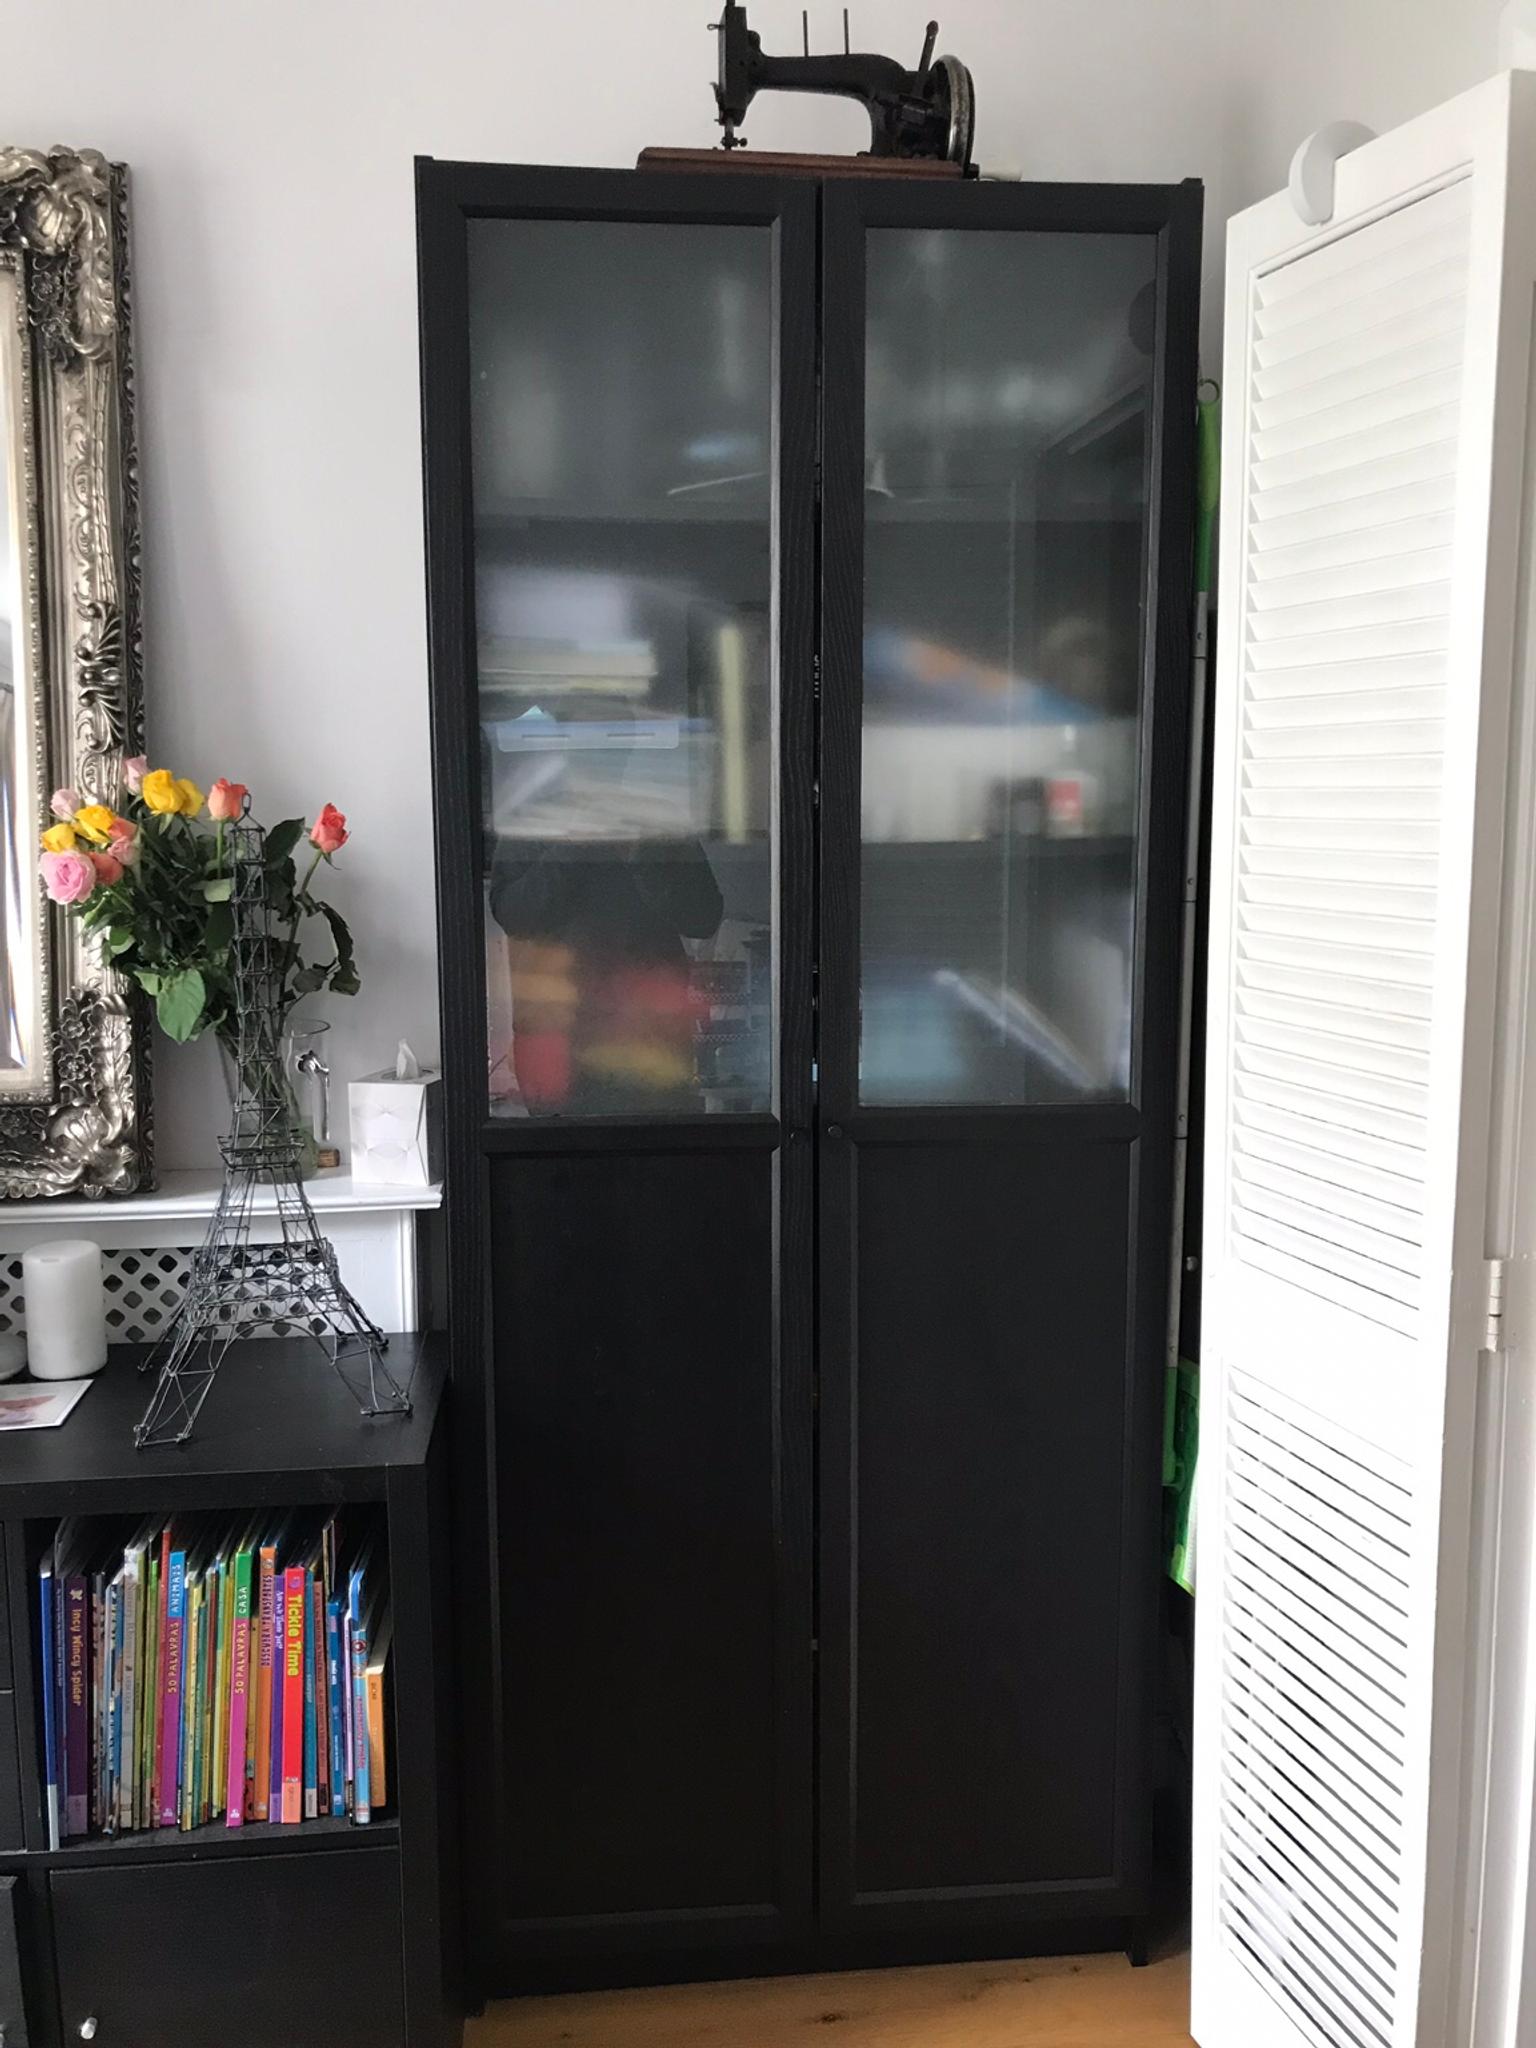 Tall Black Bookshelf With Doors In Sw3 Chelsea For 55 00 For Sale